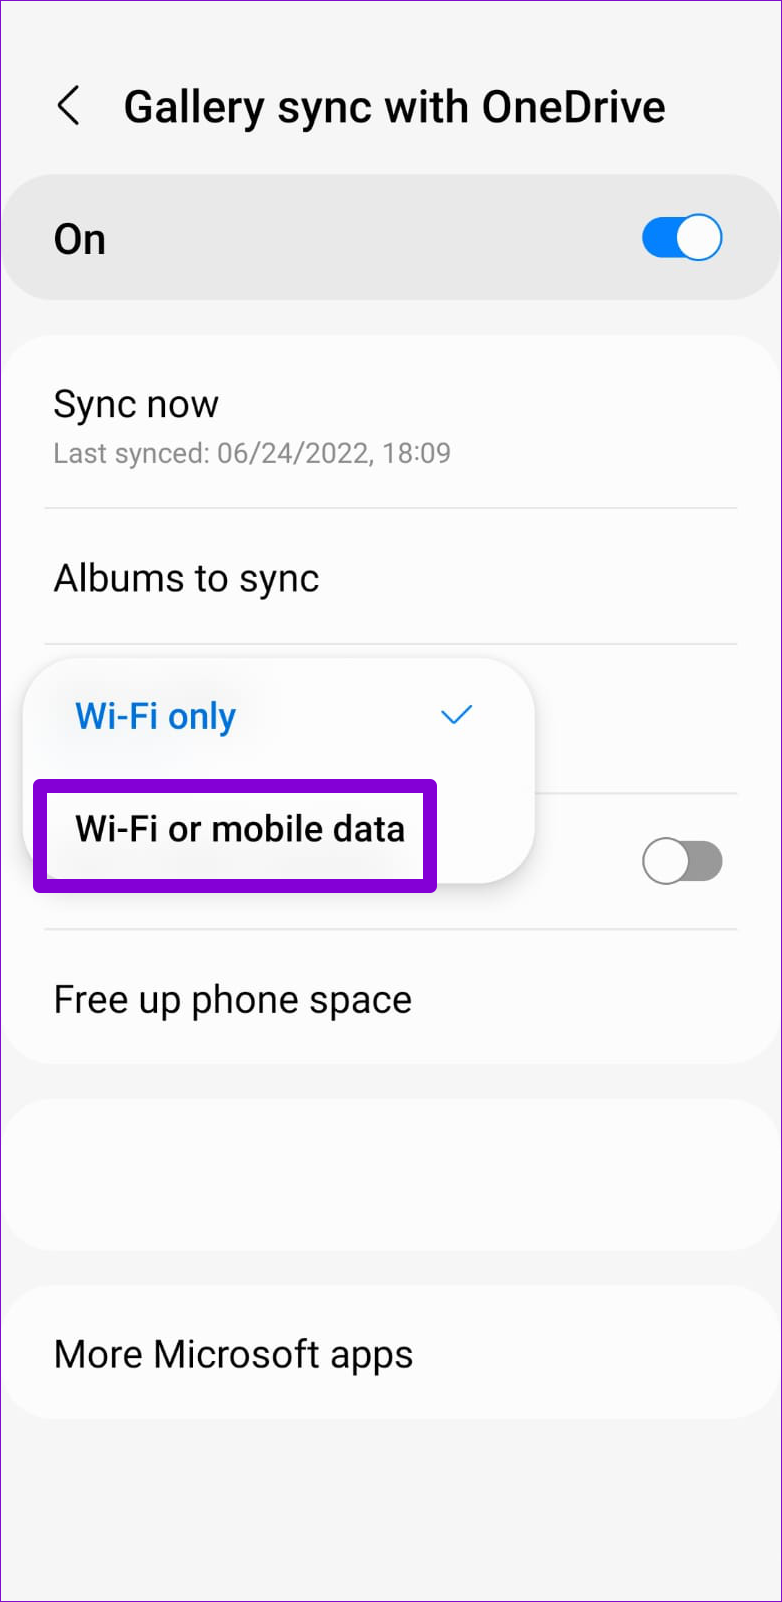 Allow OneDrive Sync in the Gallery App